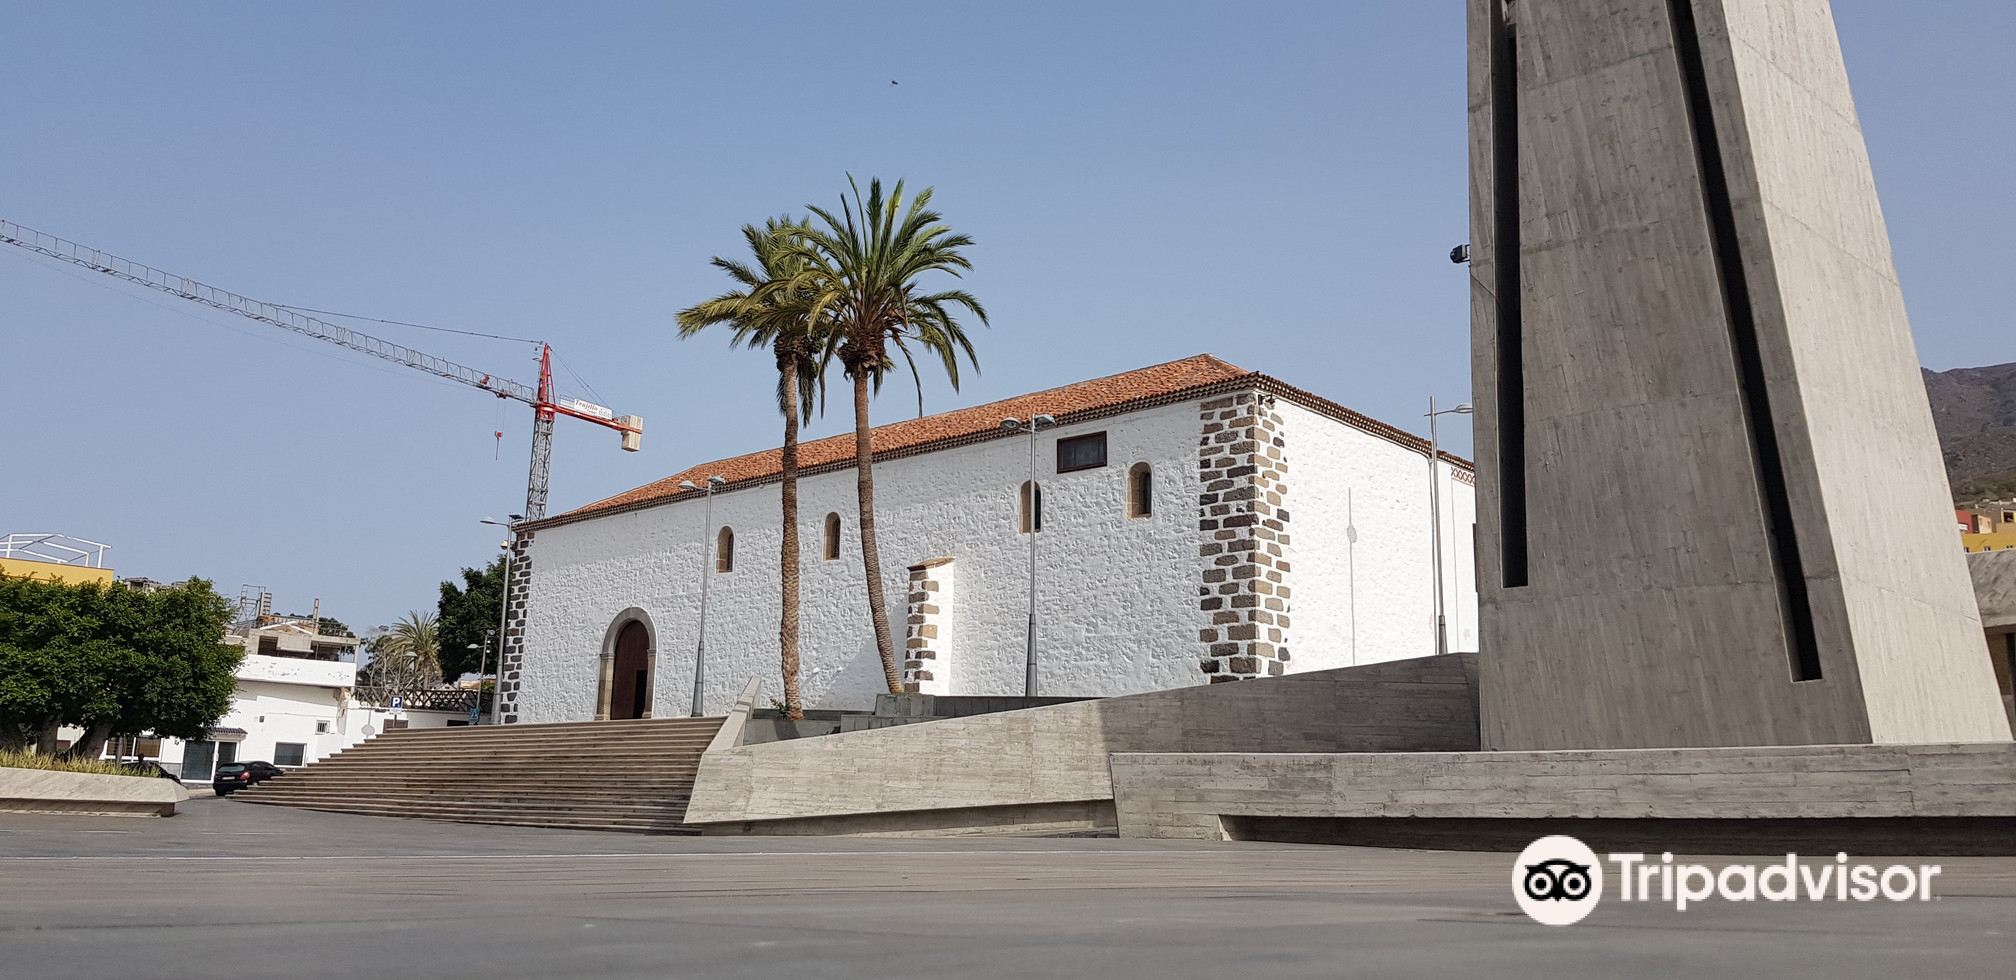 Iglesia de Santa Ursula attraction reviews - Iglesia de Santa Ursula  tickets - Iglesia de Santa Ursula discounts - Iglesia de Santa Ursula  transportation, address, opening hours - attractions, hotels, and food